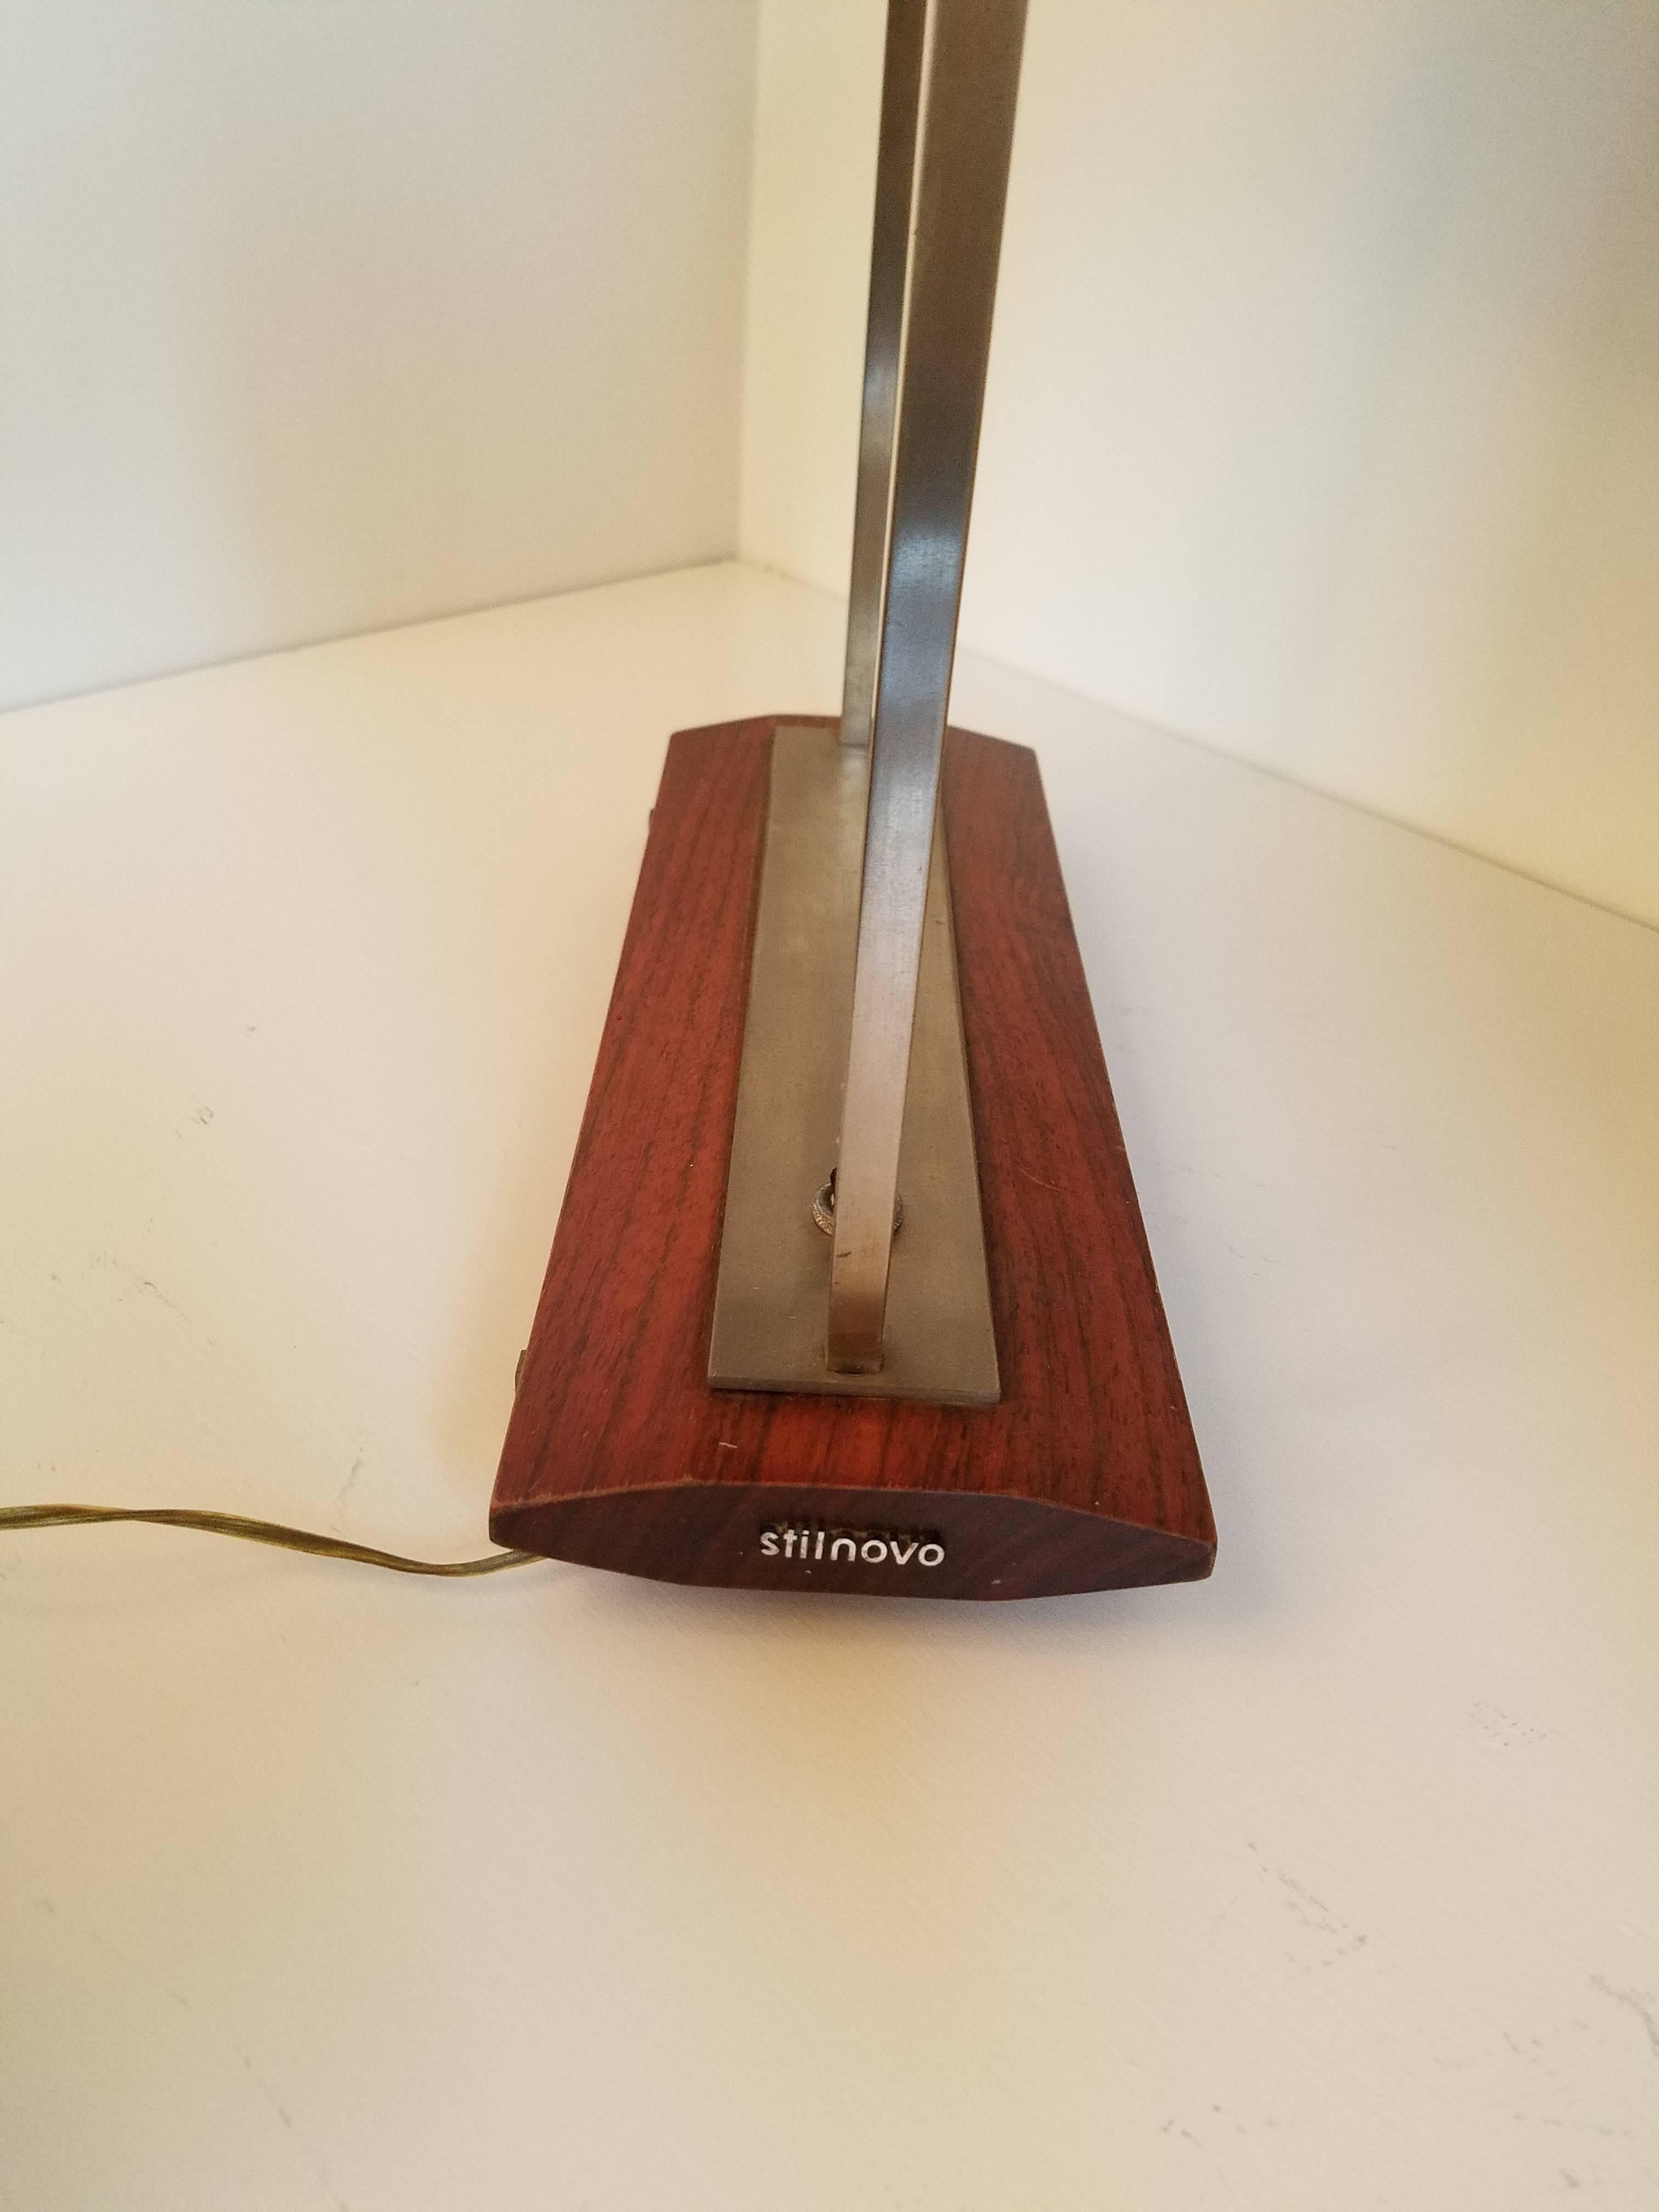 Streamlined vintage desk lamp (stamped Stilnovo) with walnut base and details and stainless steel,
circa 1955.